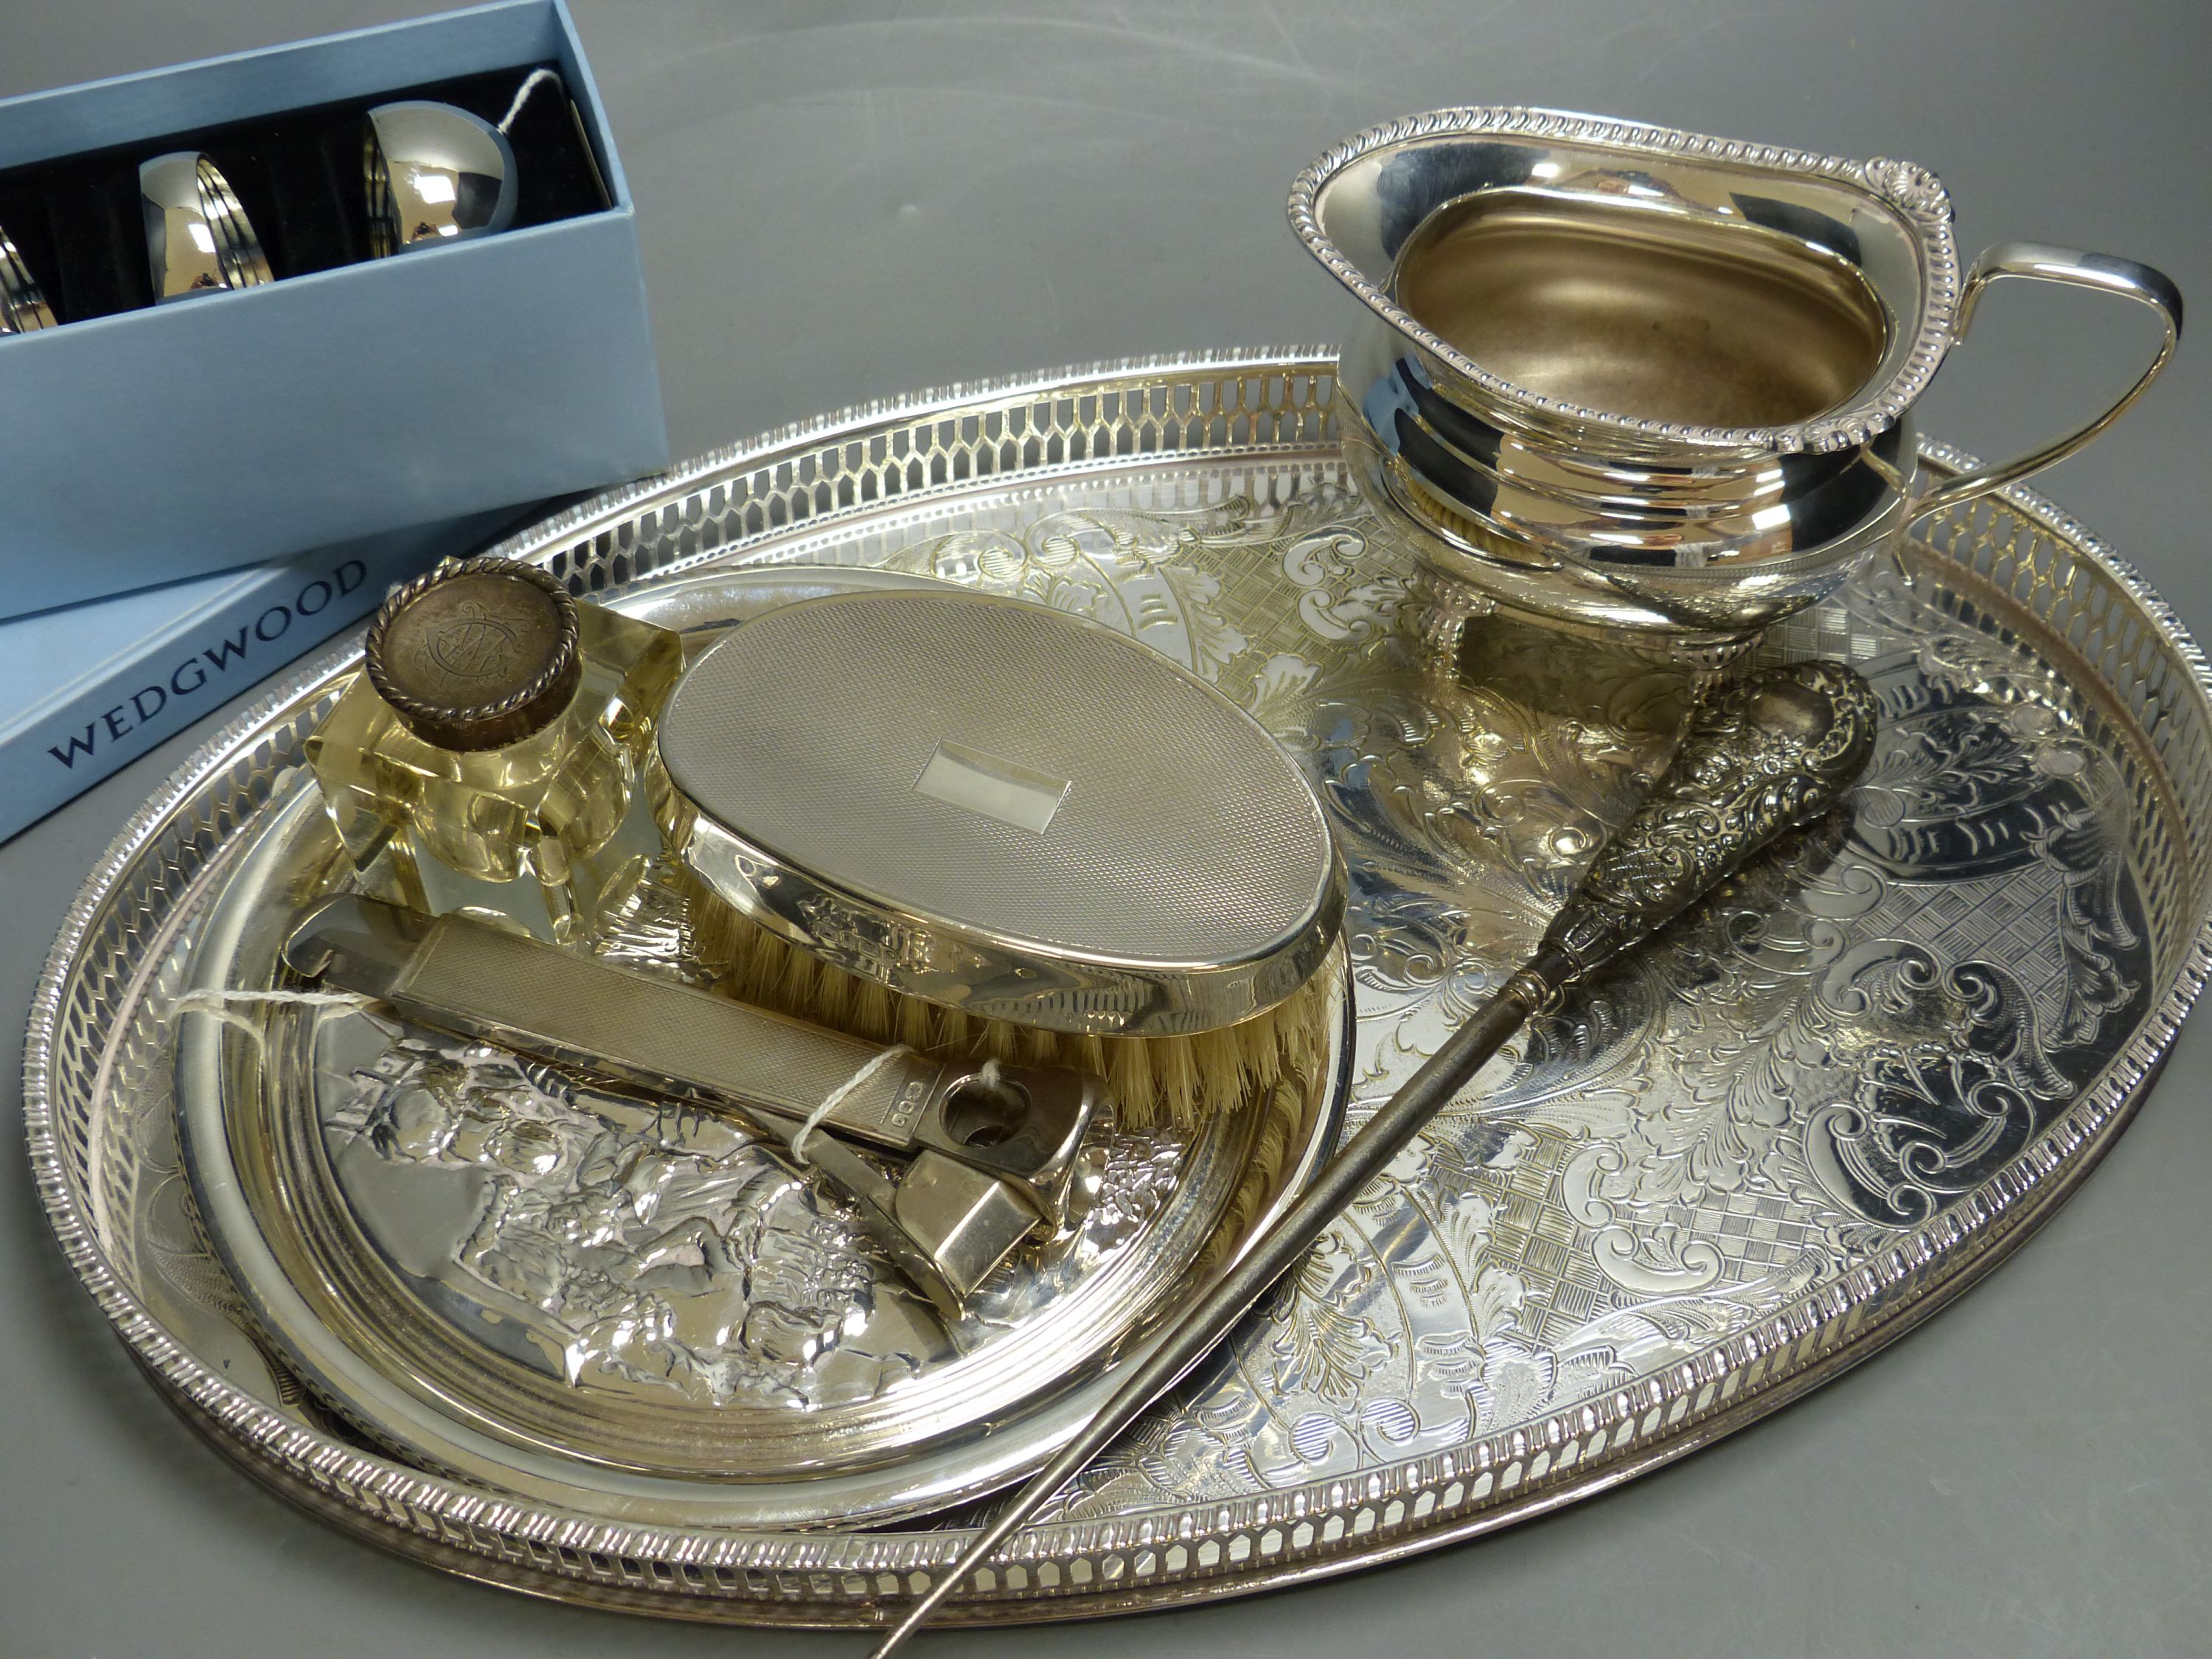 An engine-turned silver cigar cutter, a Birmingham Mint 1974 silver Christmas plate and sundry other items